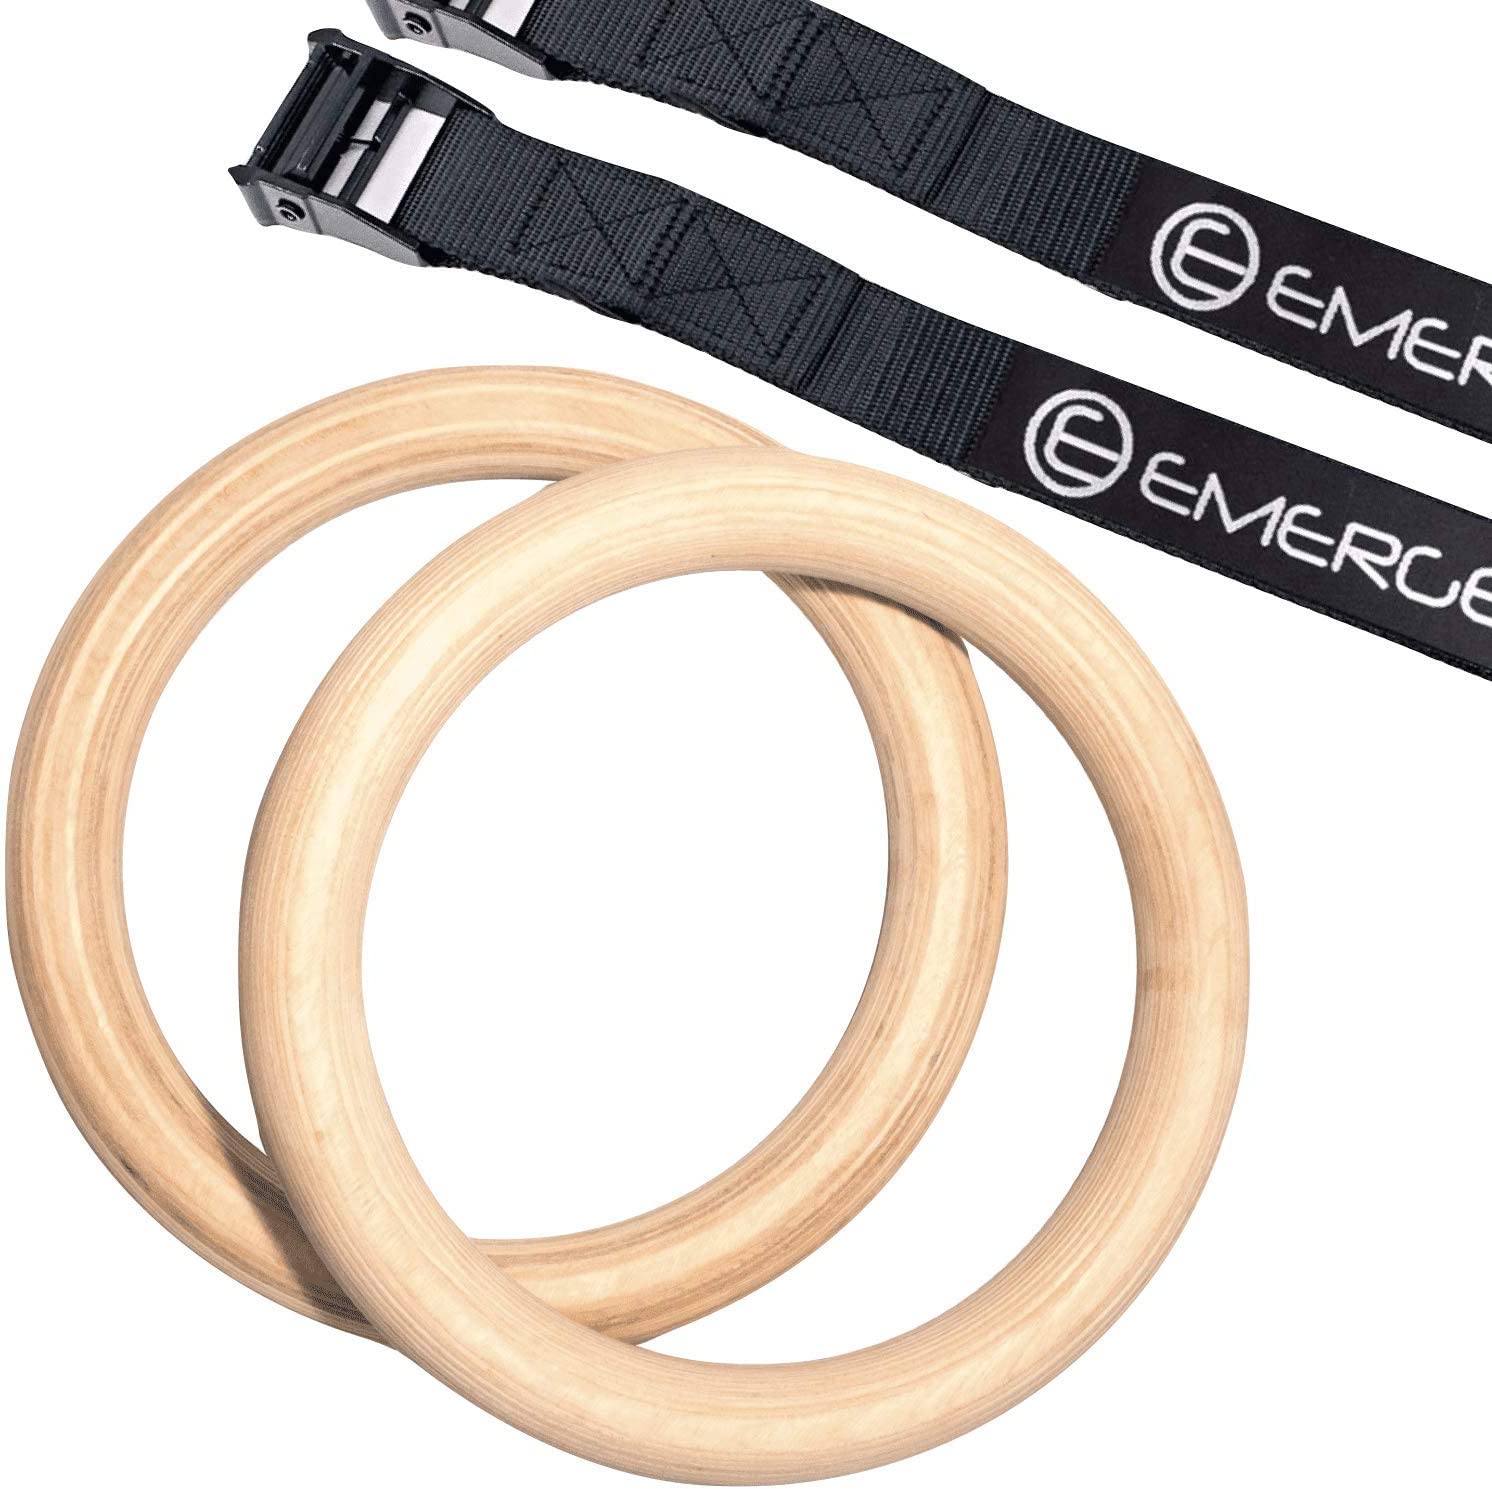 Emerge Wooden Olympic Gymnastics Rings